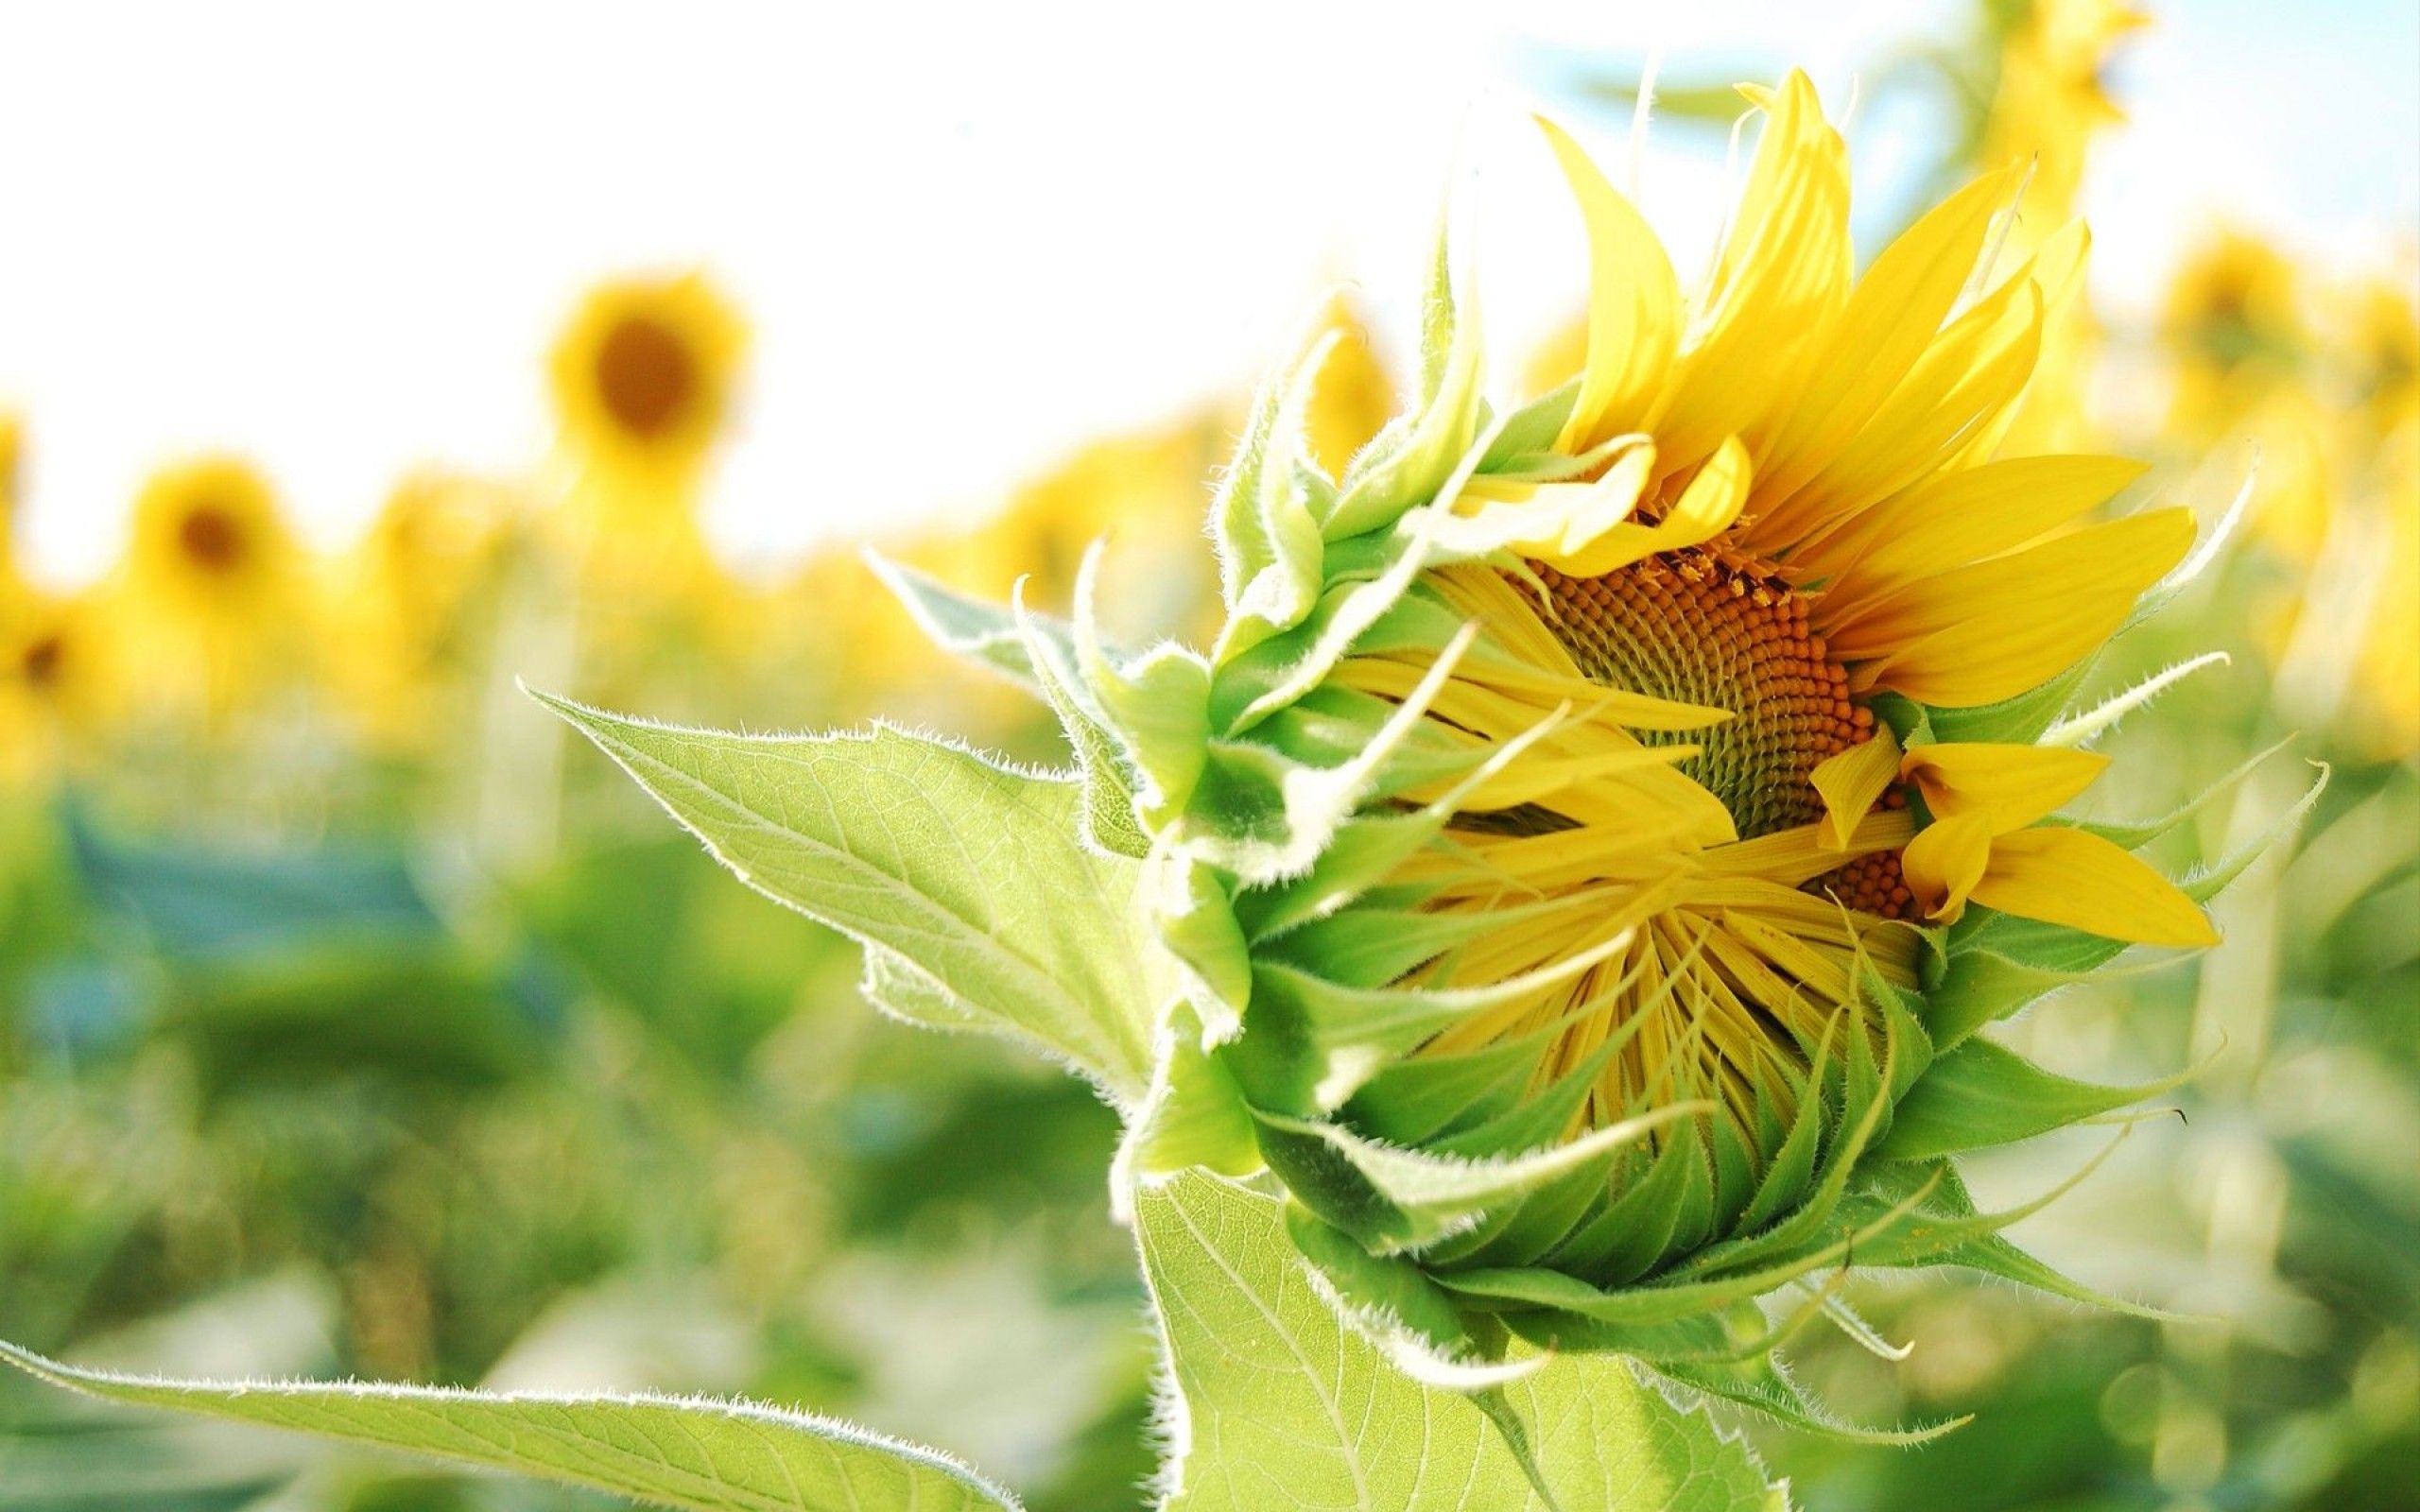 Cool Sunflower Nature Wallpaper Picture Background